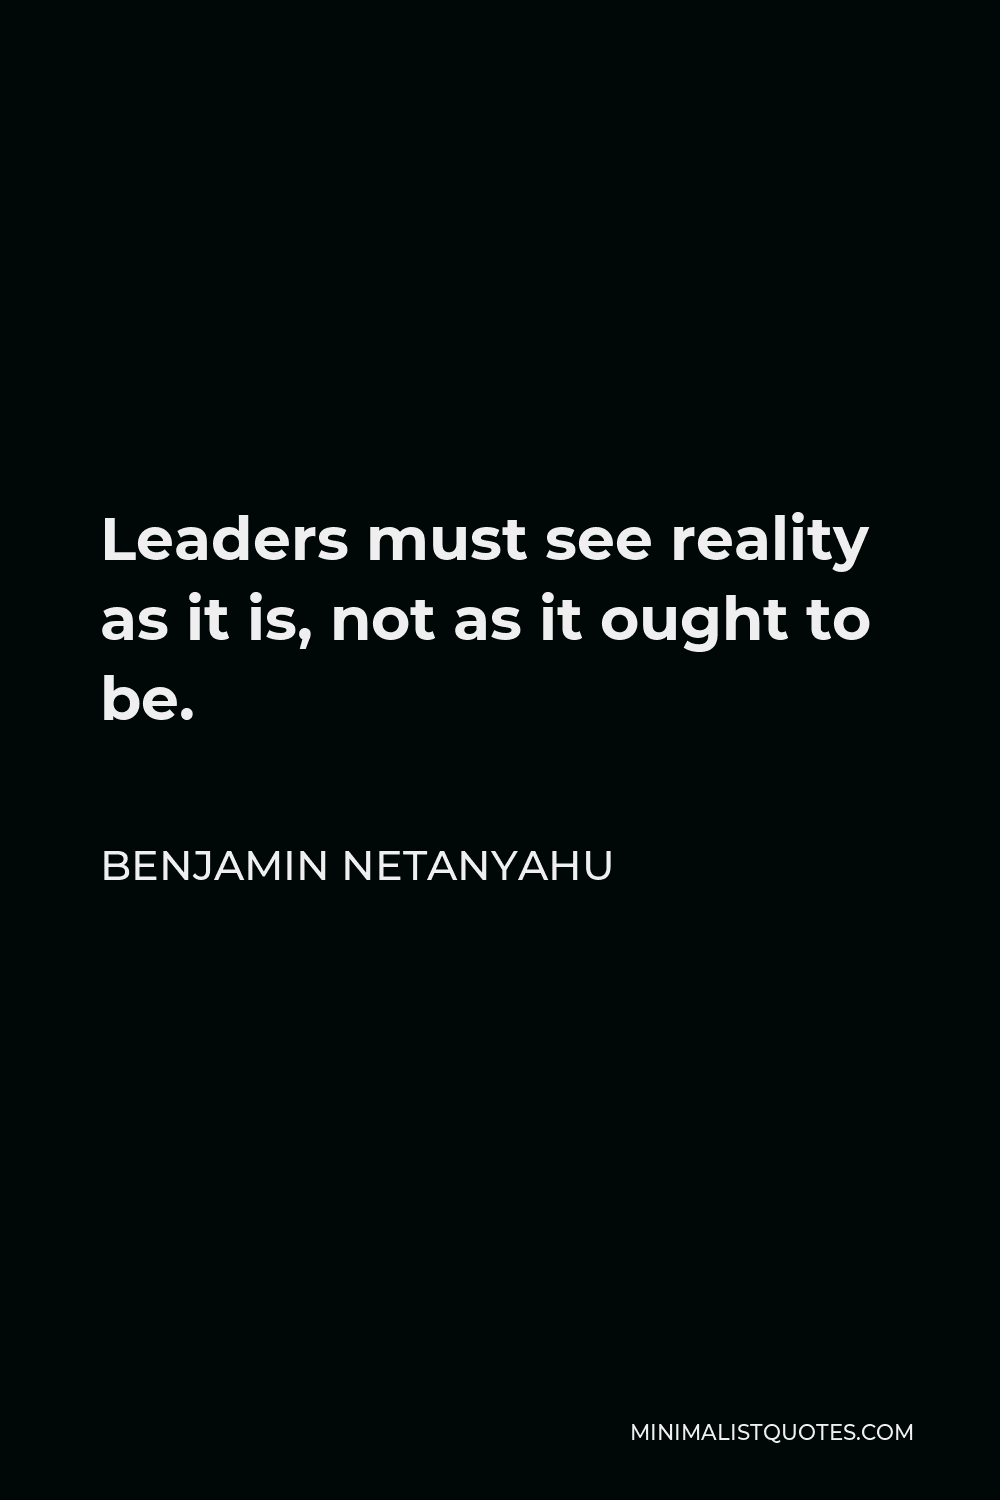 Benjamin Netanyahu Quote - Leaders must see reality as it is, not as it ought to be.